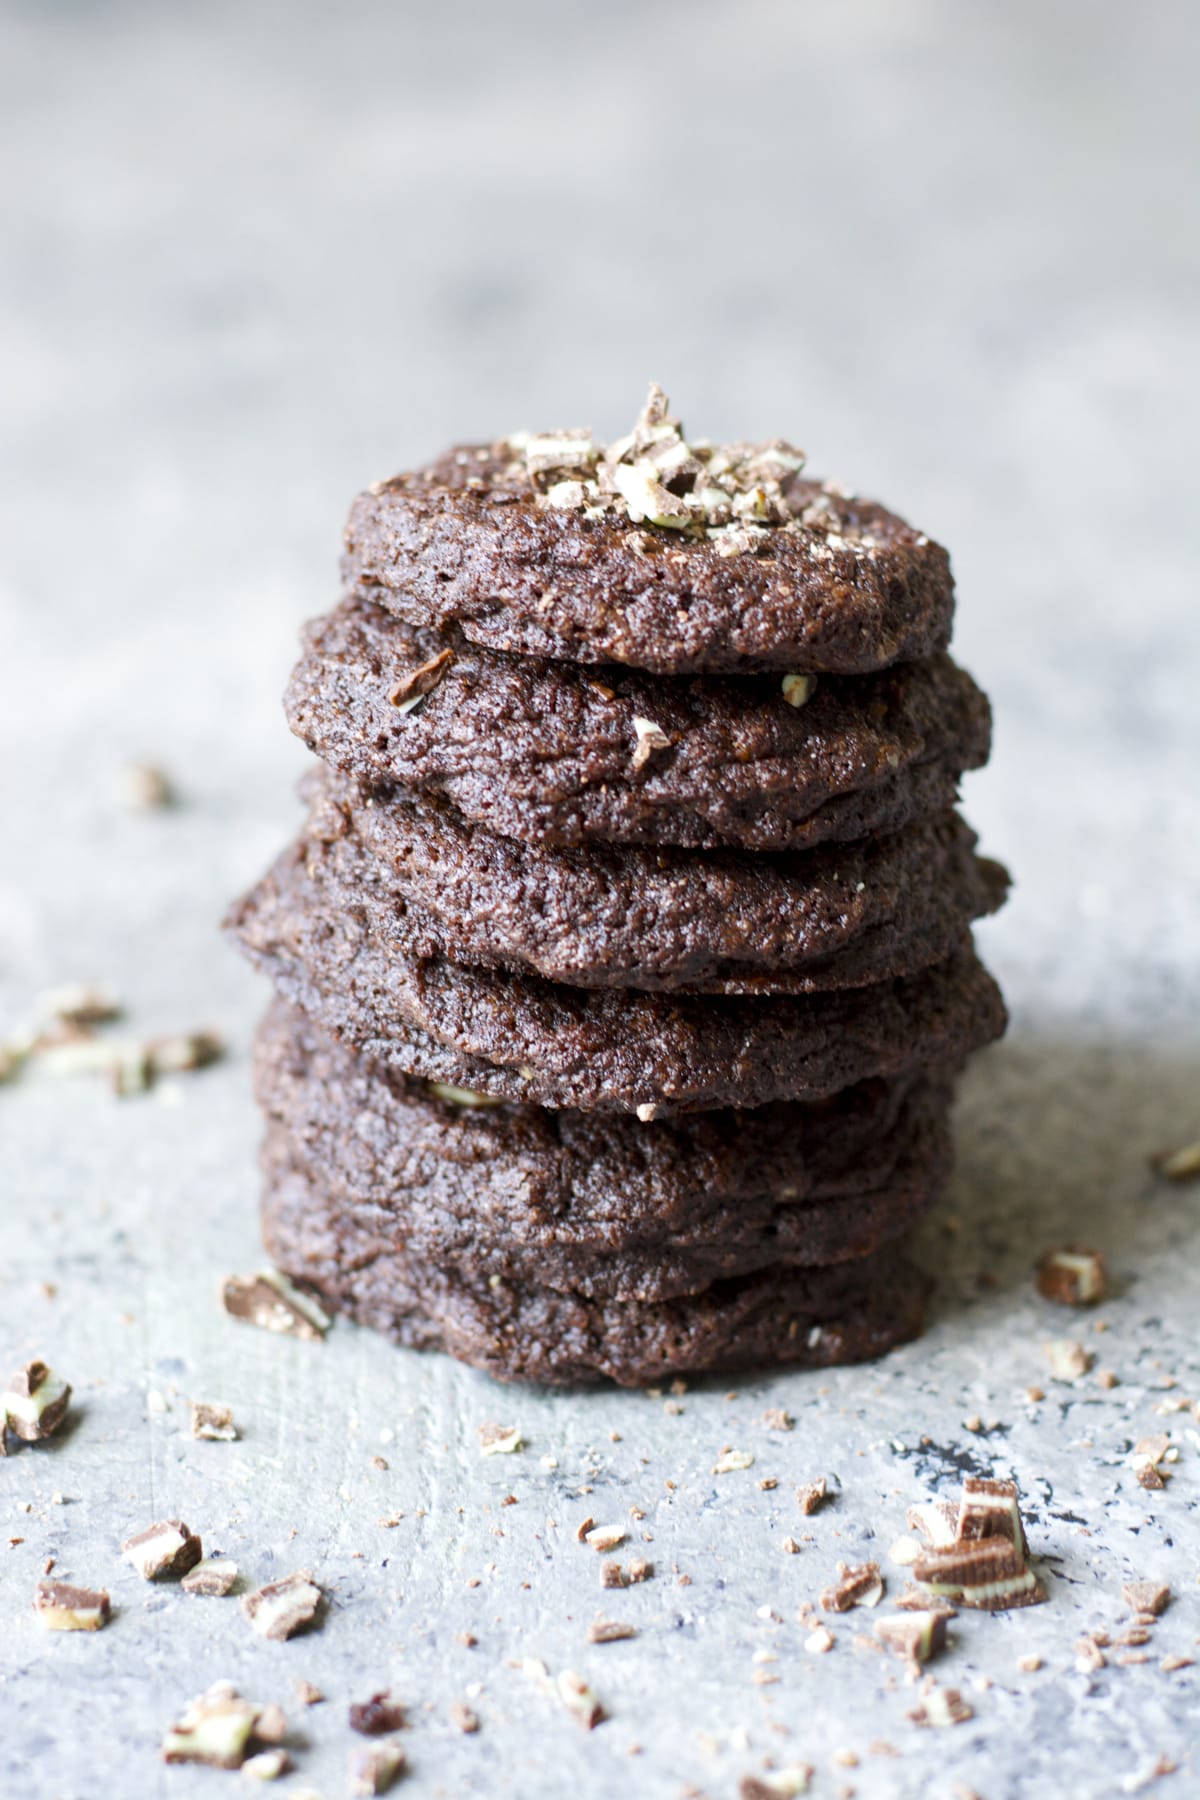 Five ingredient gluten free Dark Chocolate Peppermint Cookies are packed with Andes mints for a perfect holiday treat!